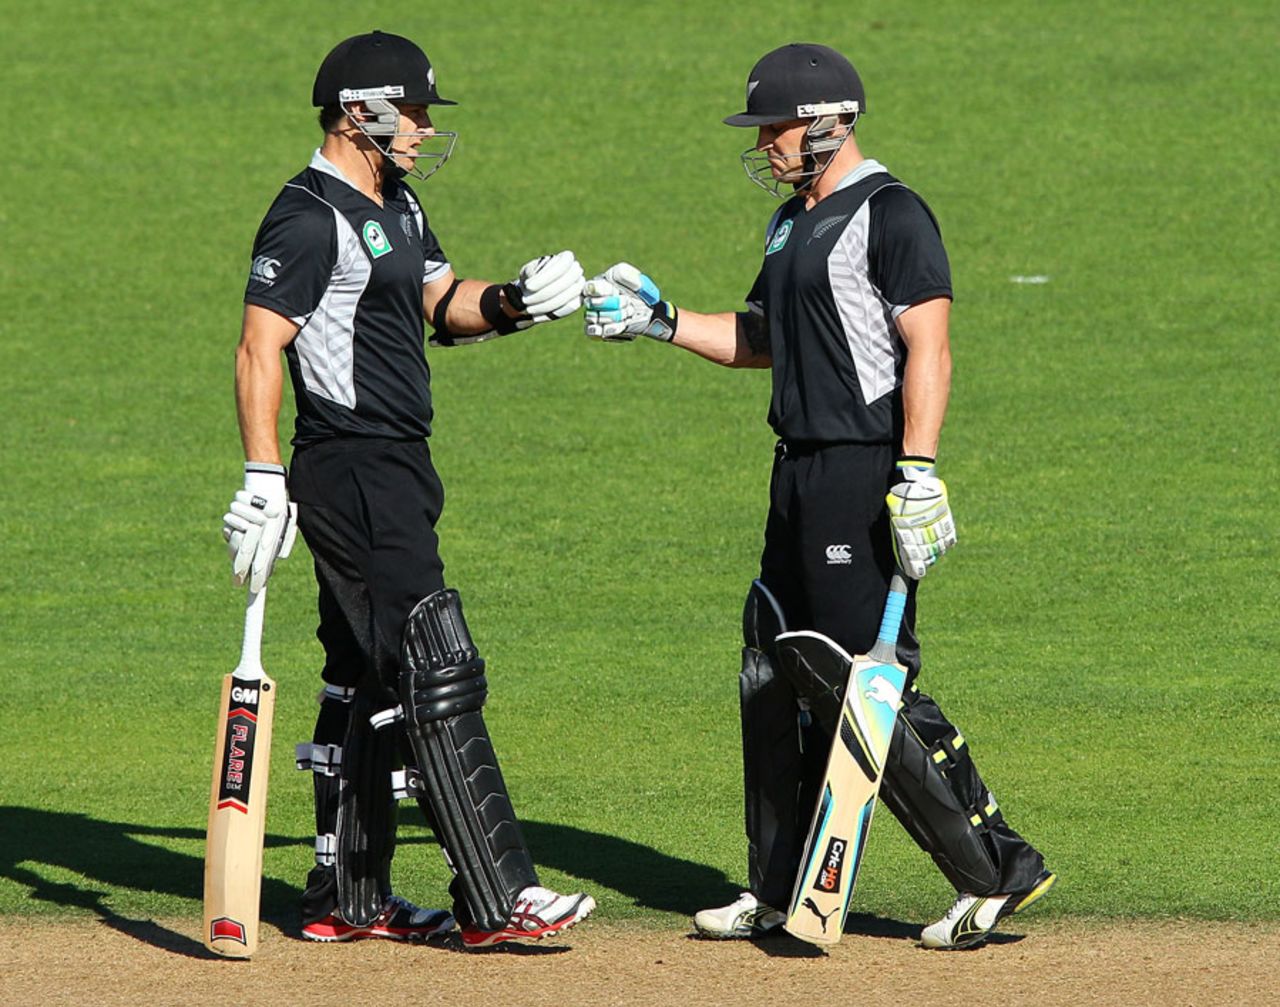 The McCullum brothers added 44 in just 17 balls, New Zealand v Zimbabwe, 3rd ODI, Napier, February 9, 2012